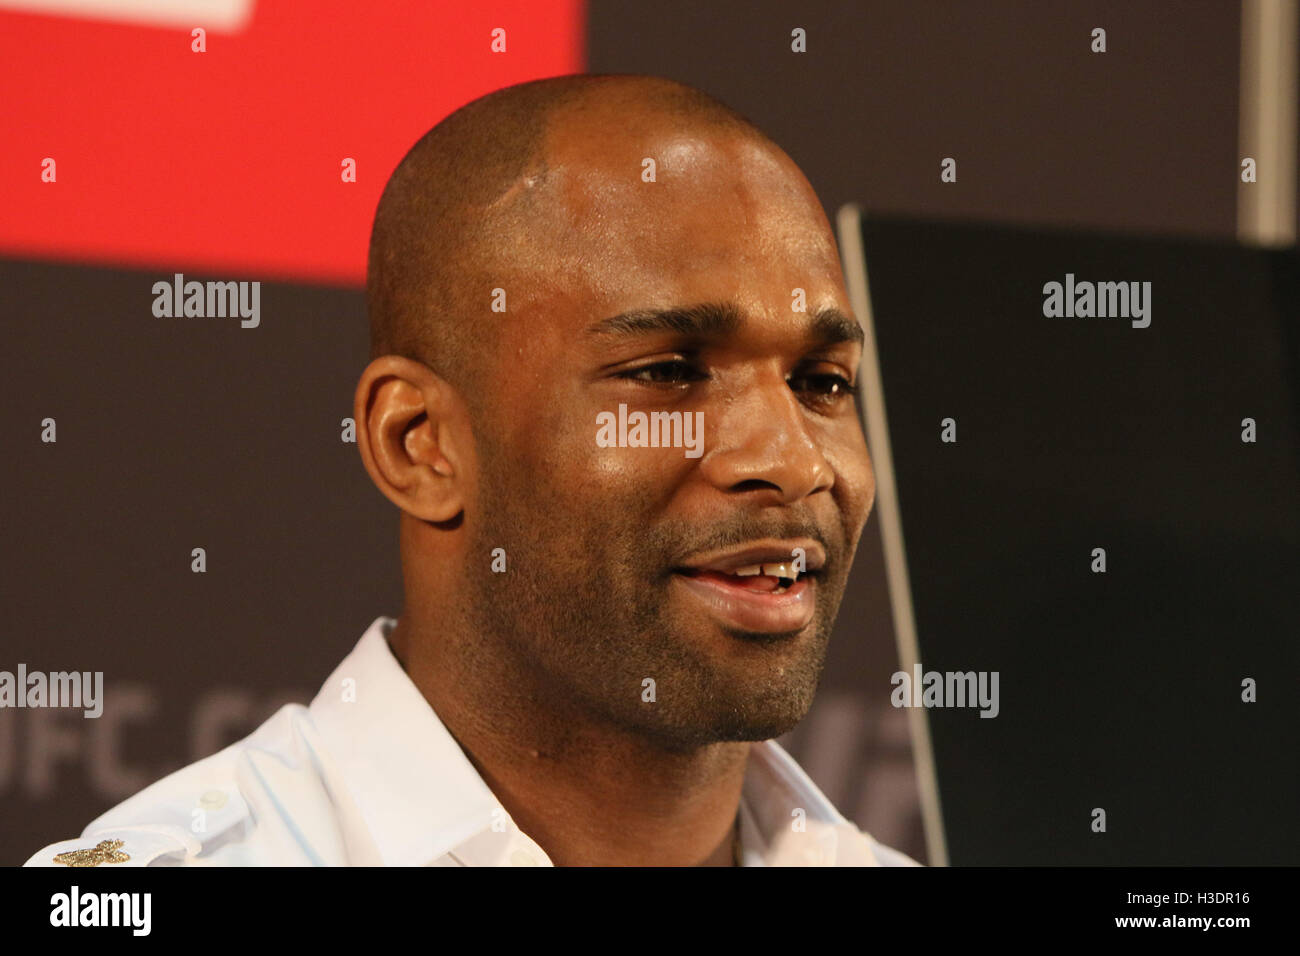 Manchester, UK. 6th October, 2016. UFC 204 - Media Day at Arena Manchester. Thursday the 6 of Oct. 2016.Jimi Manuwa answers media questions ahead of UFC 204.   Credit:  Dan Cooke/Alamy Live News Stock Photo